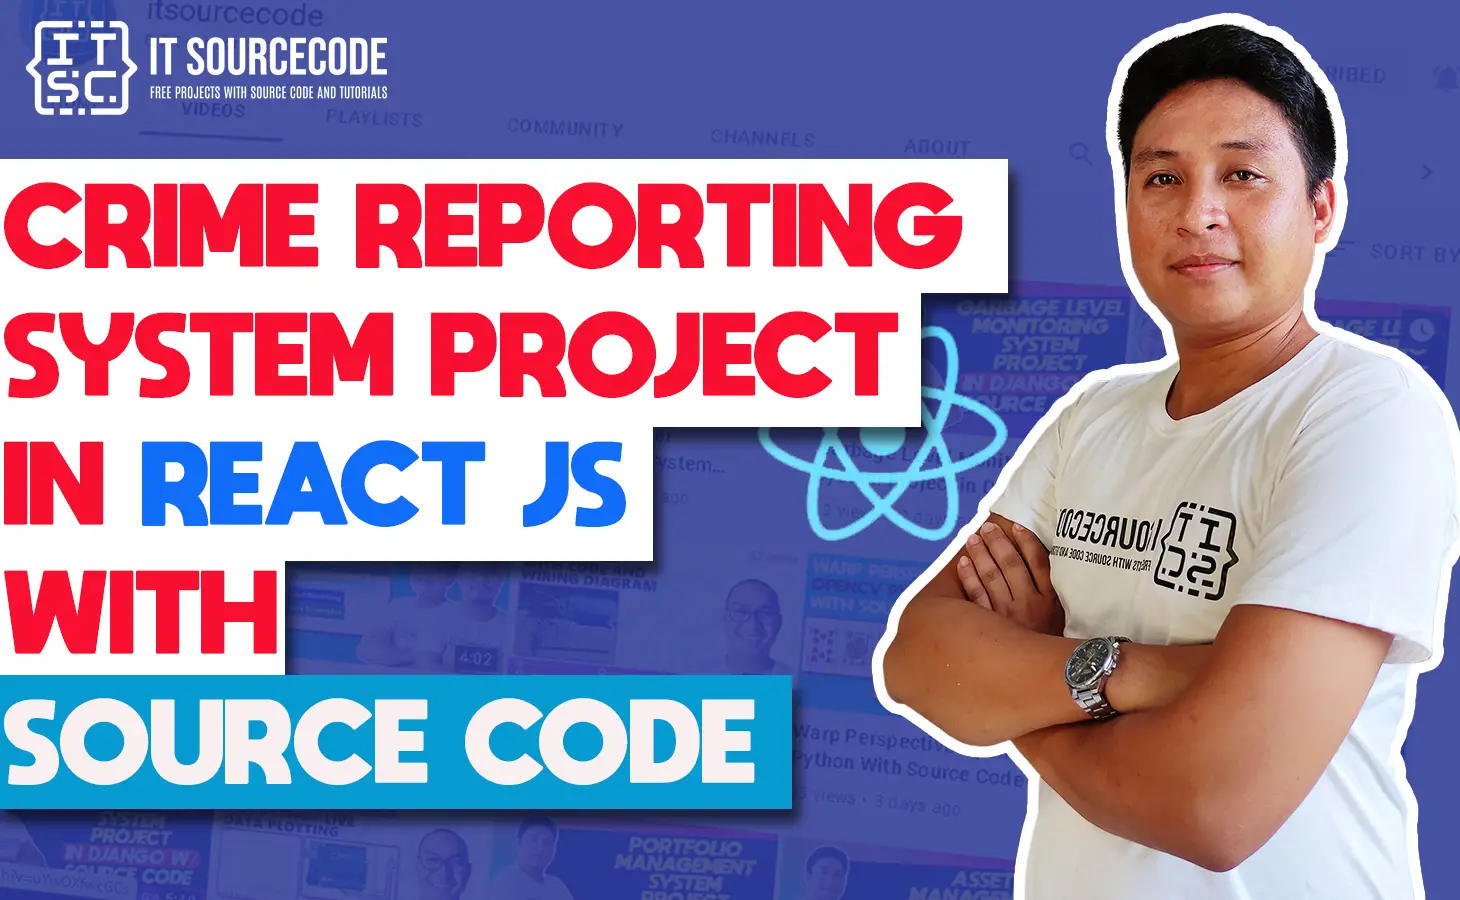 Crime Reporting System Project in React JS with Source Code